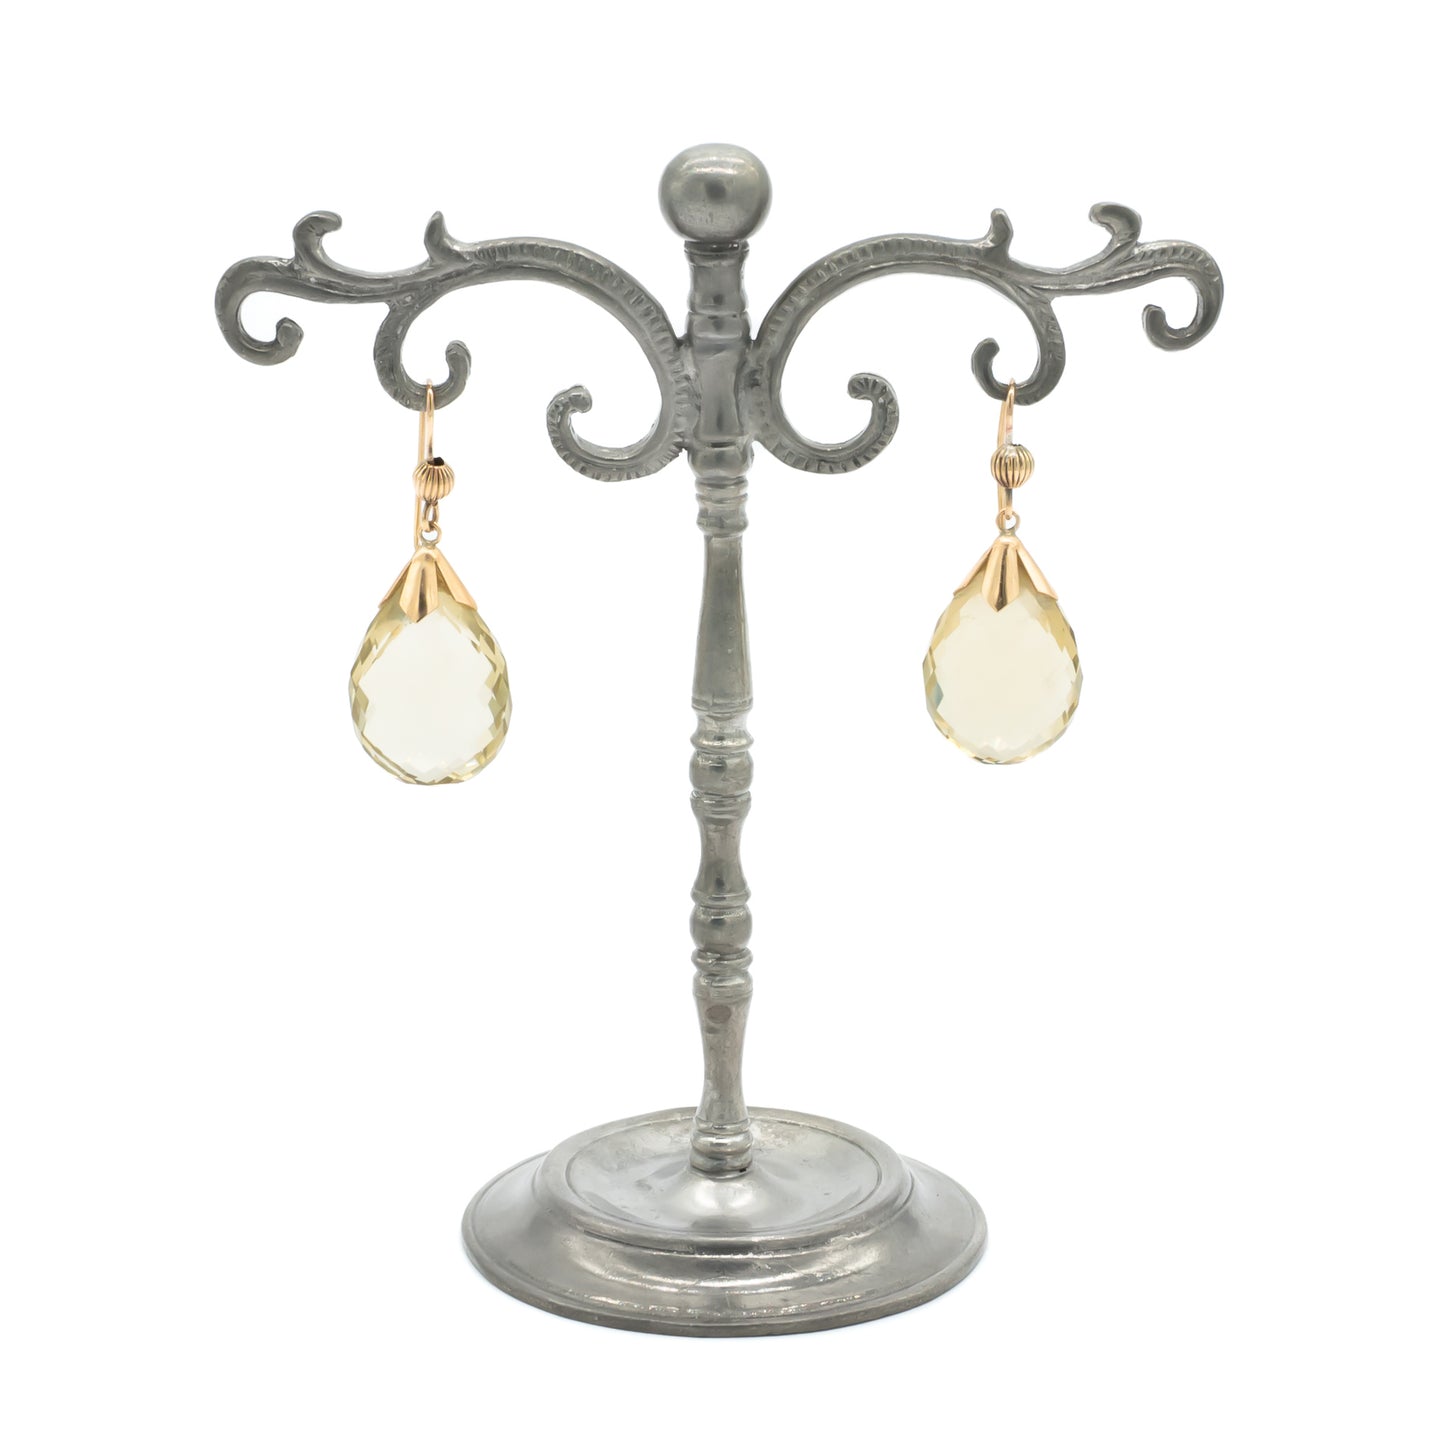 Classic 9ct gold earrings with beautifully faceted citrine drops and shepherd hooks. London